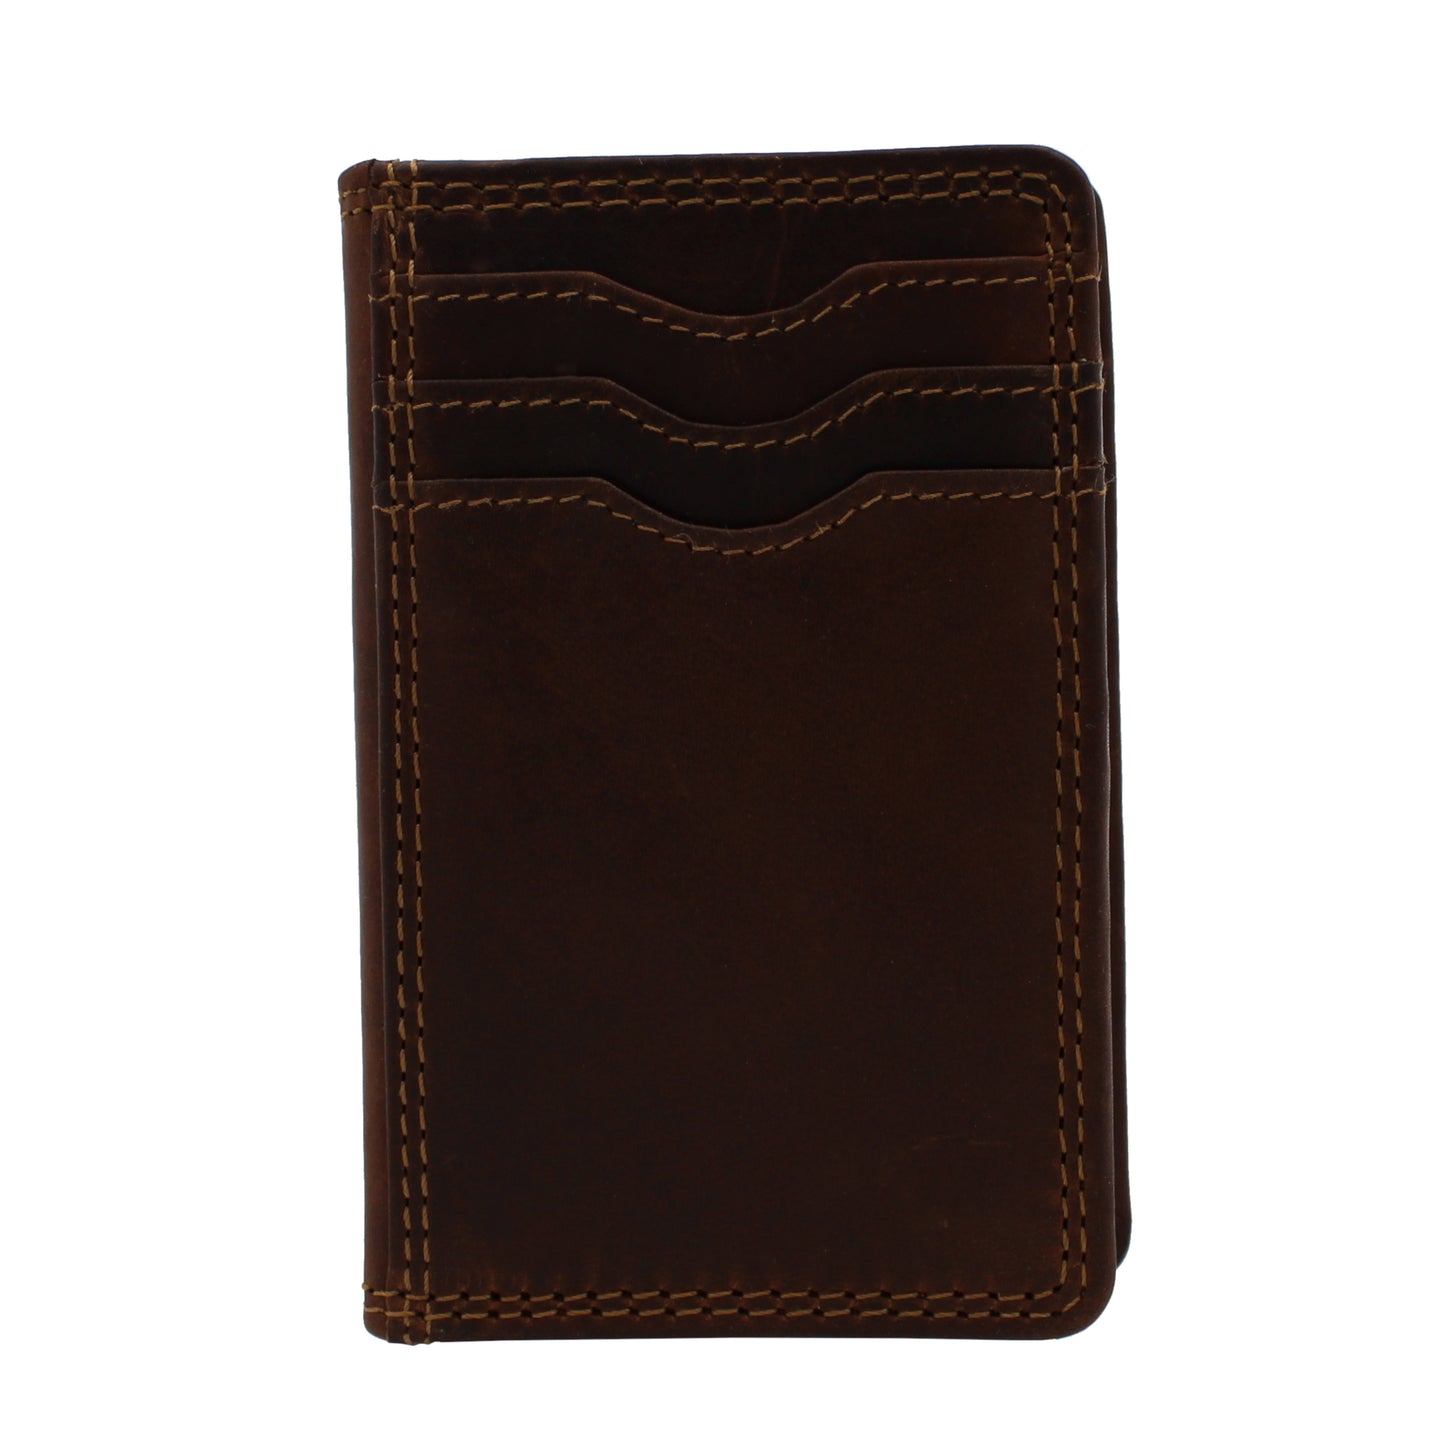 RE Leather Wallet - Bifold Credit Card Wallet